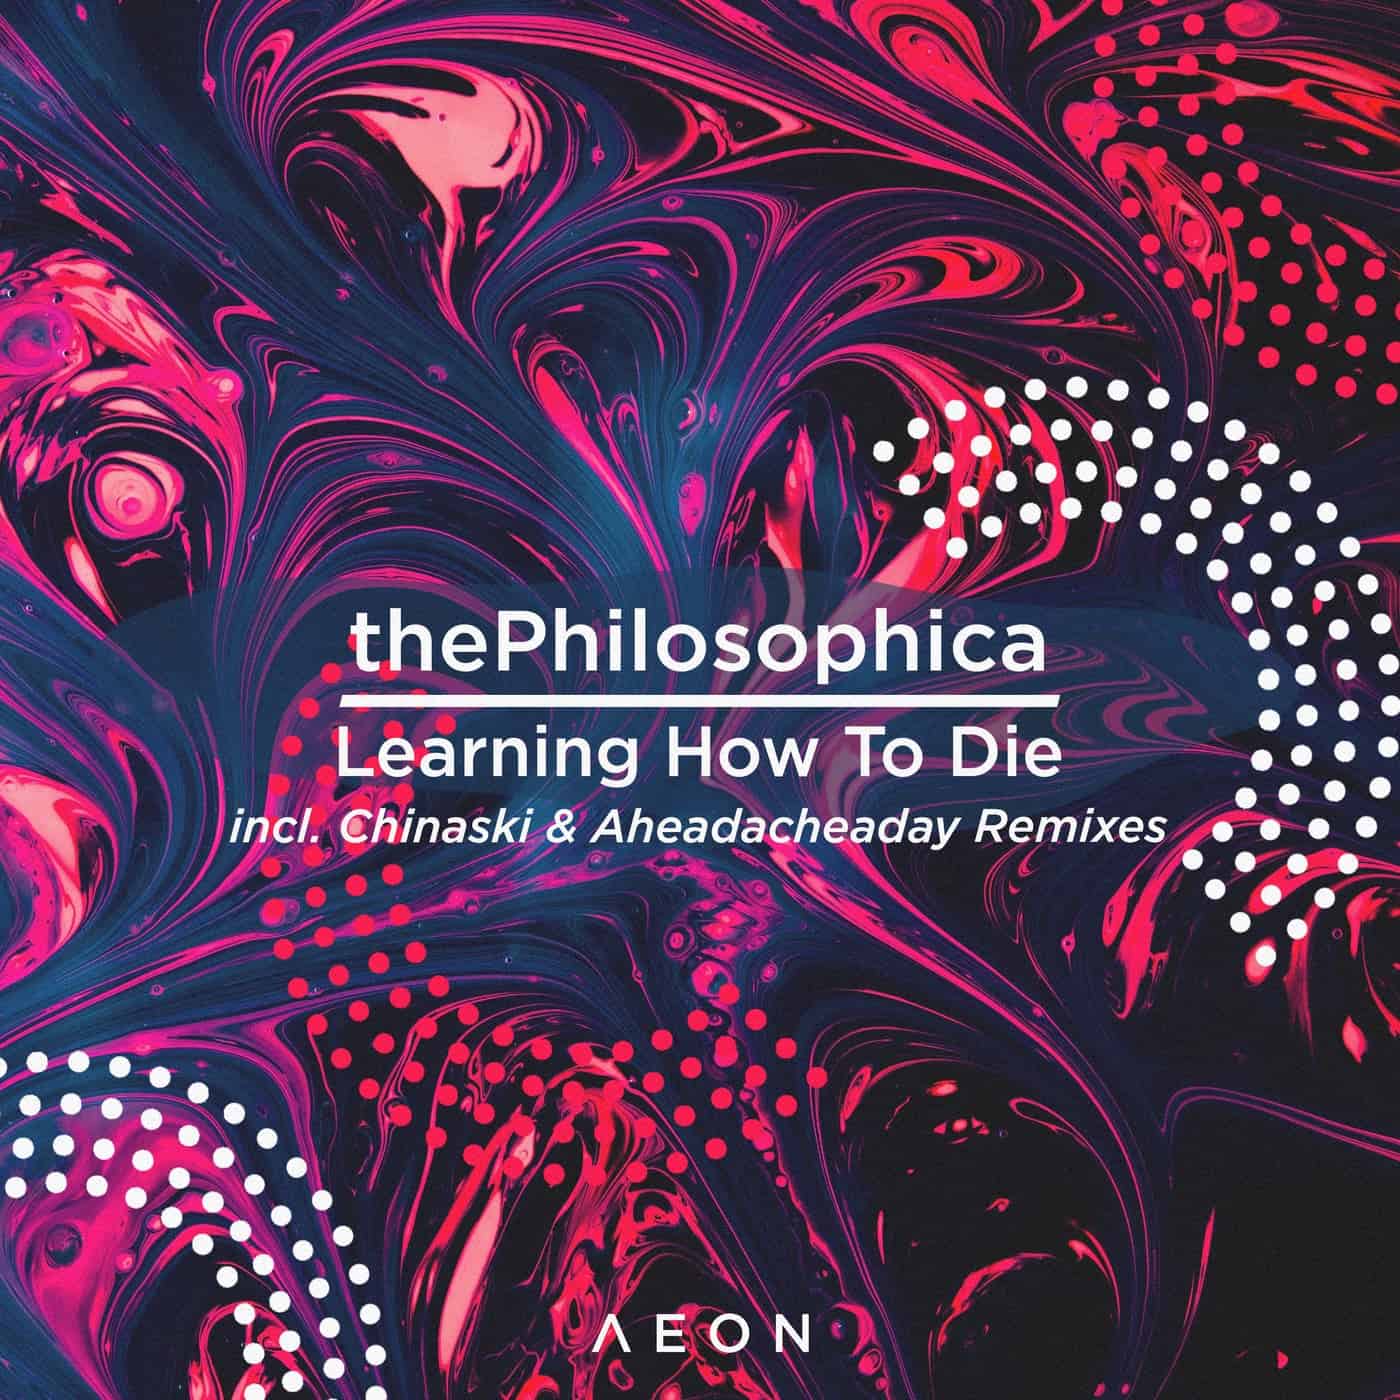 Download thePhilosophica - Learning How To Die on Electrobuzz